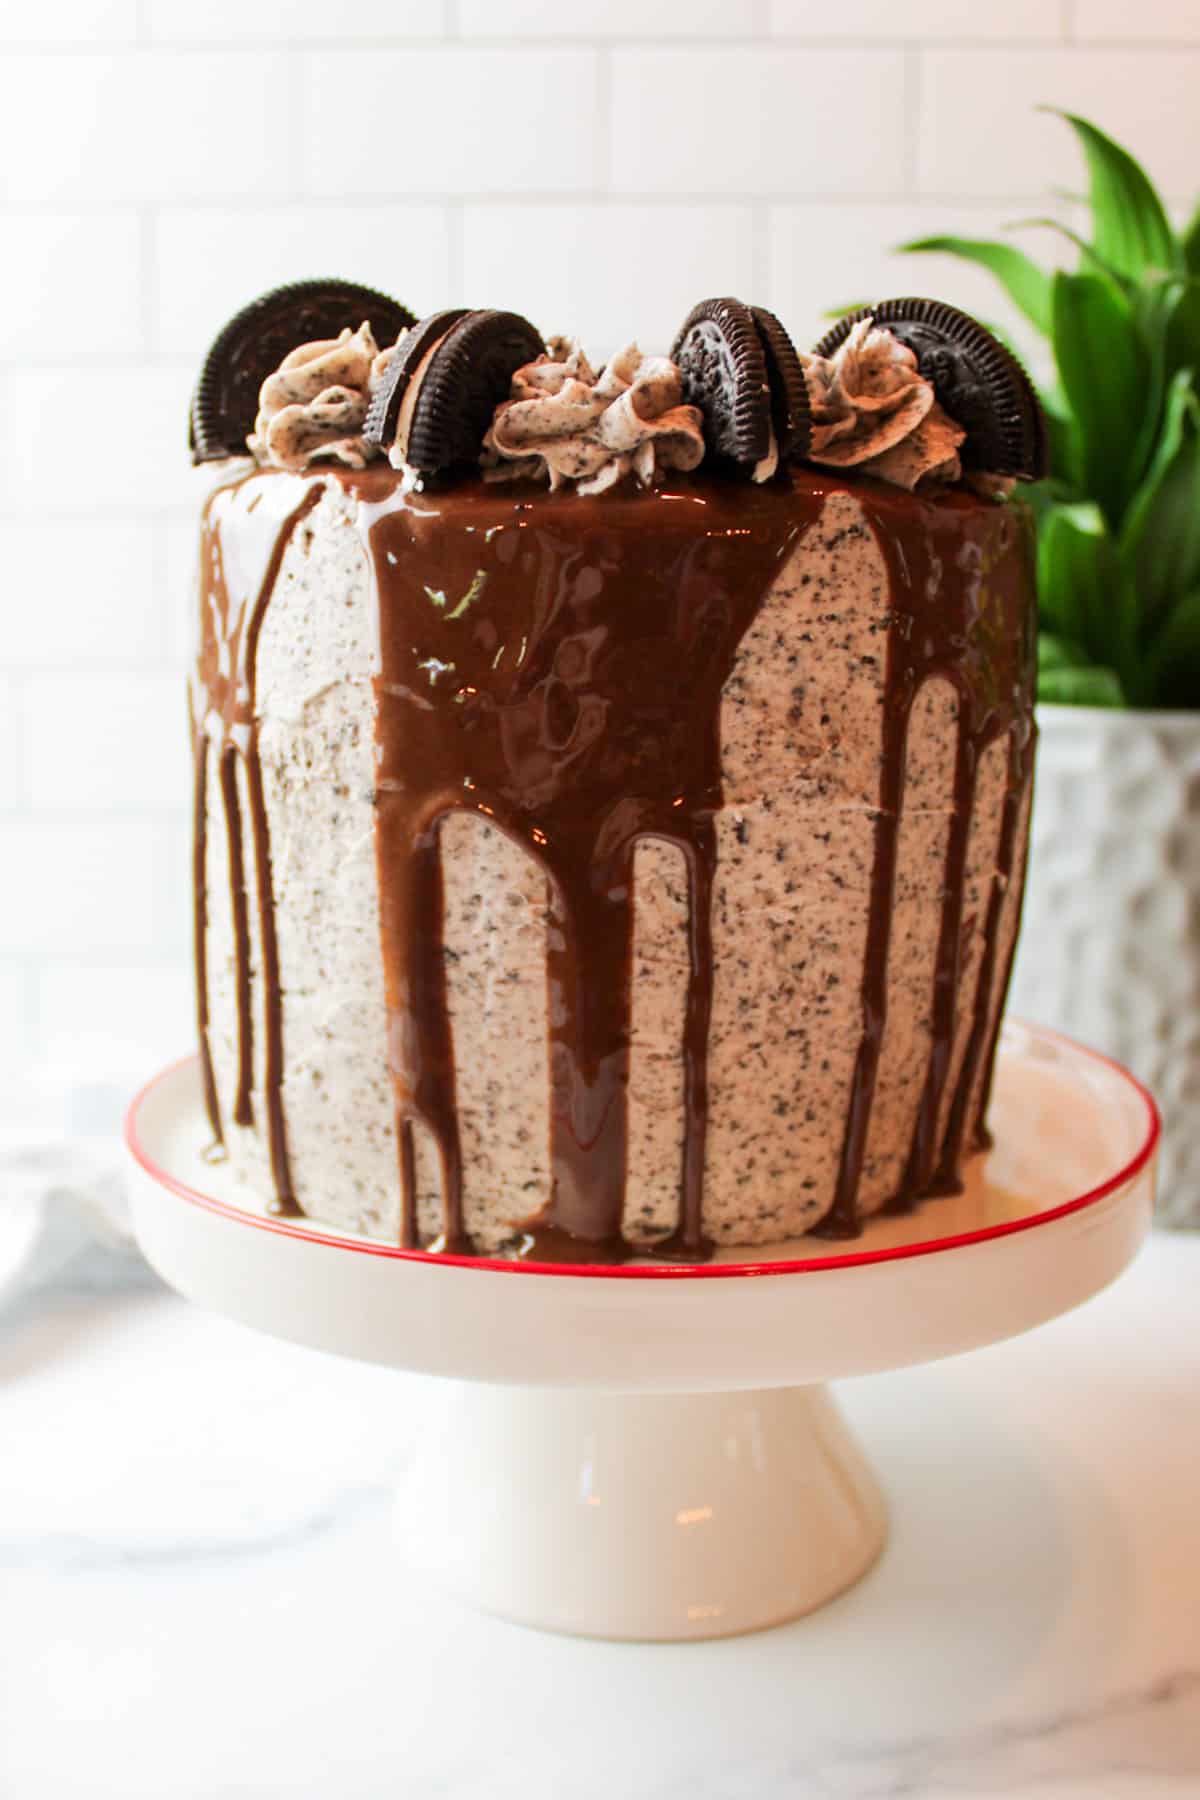 oreo buttercream and chocolate drip on a tall layer cake